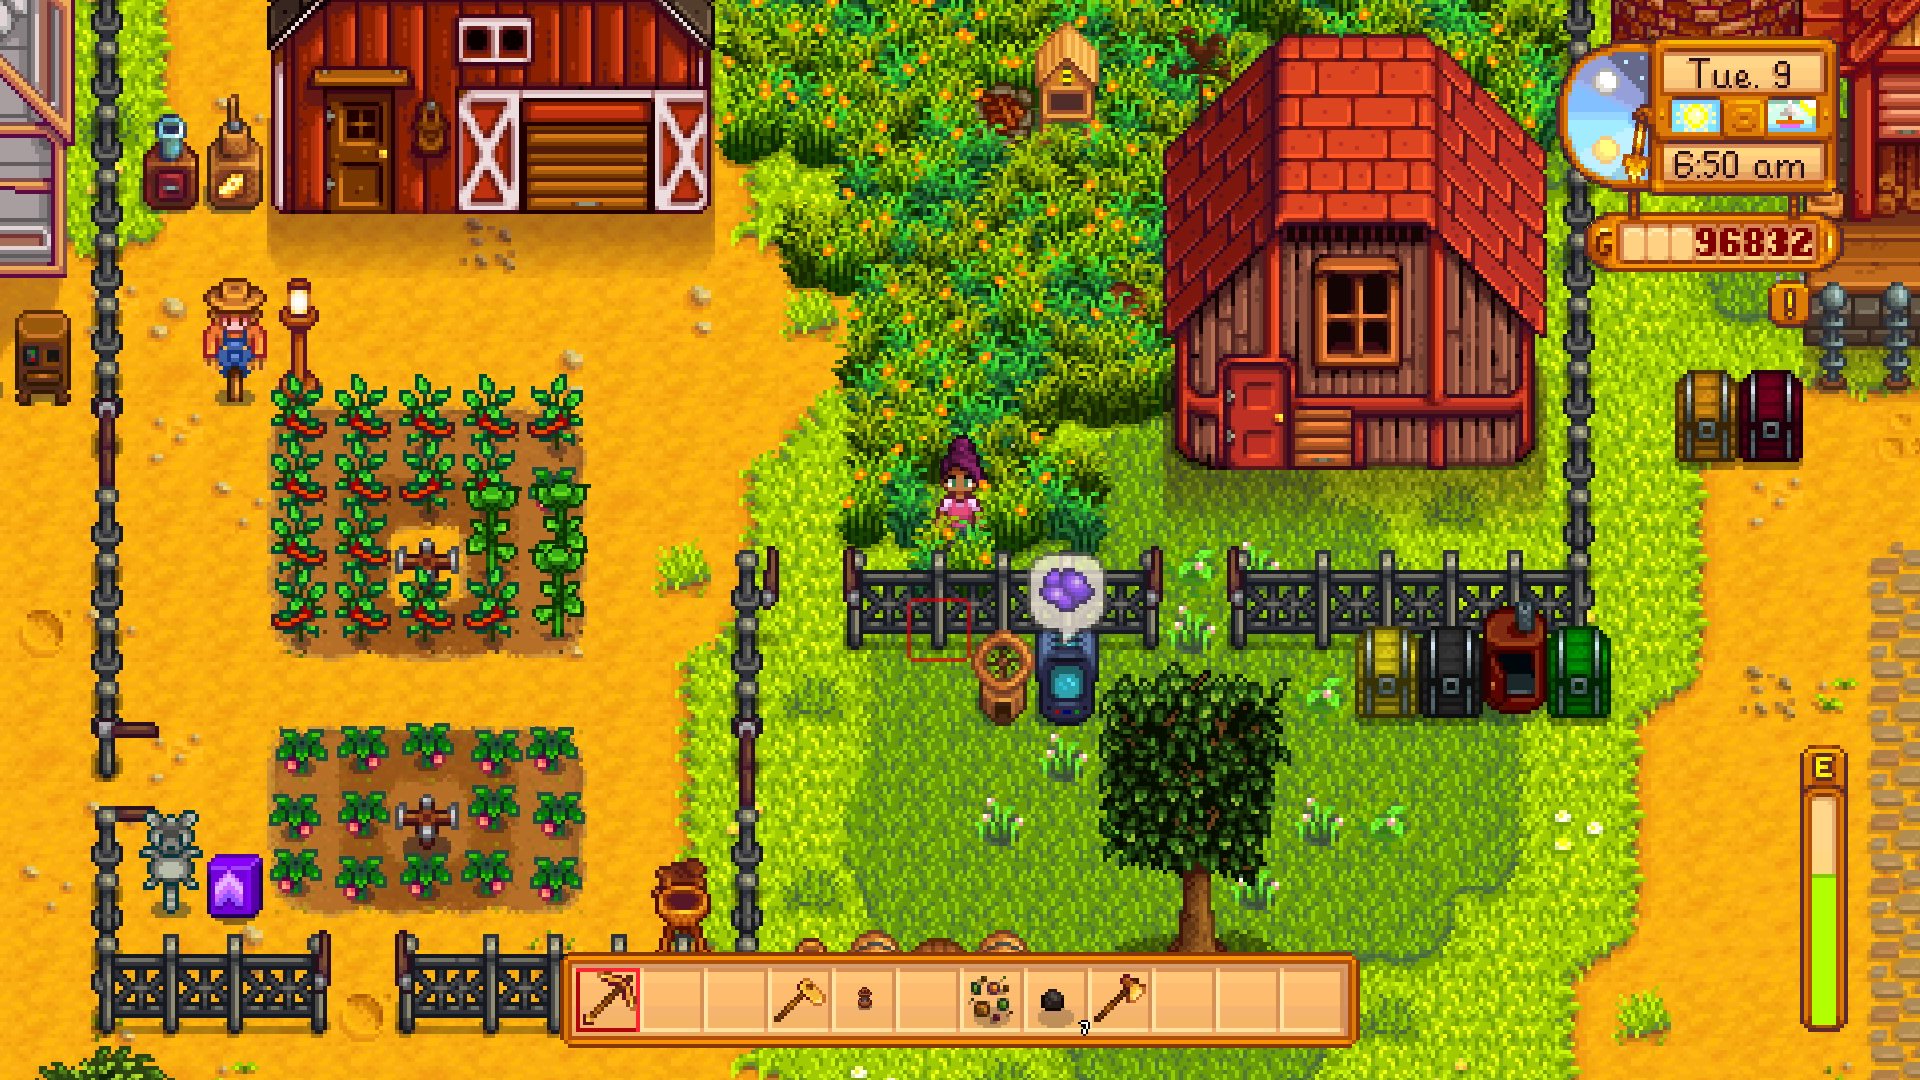 Community Farm Is A 24 000 Tile Stardew Valley Map For 10 Person Multiplayer Pc Gamer